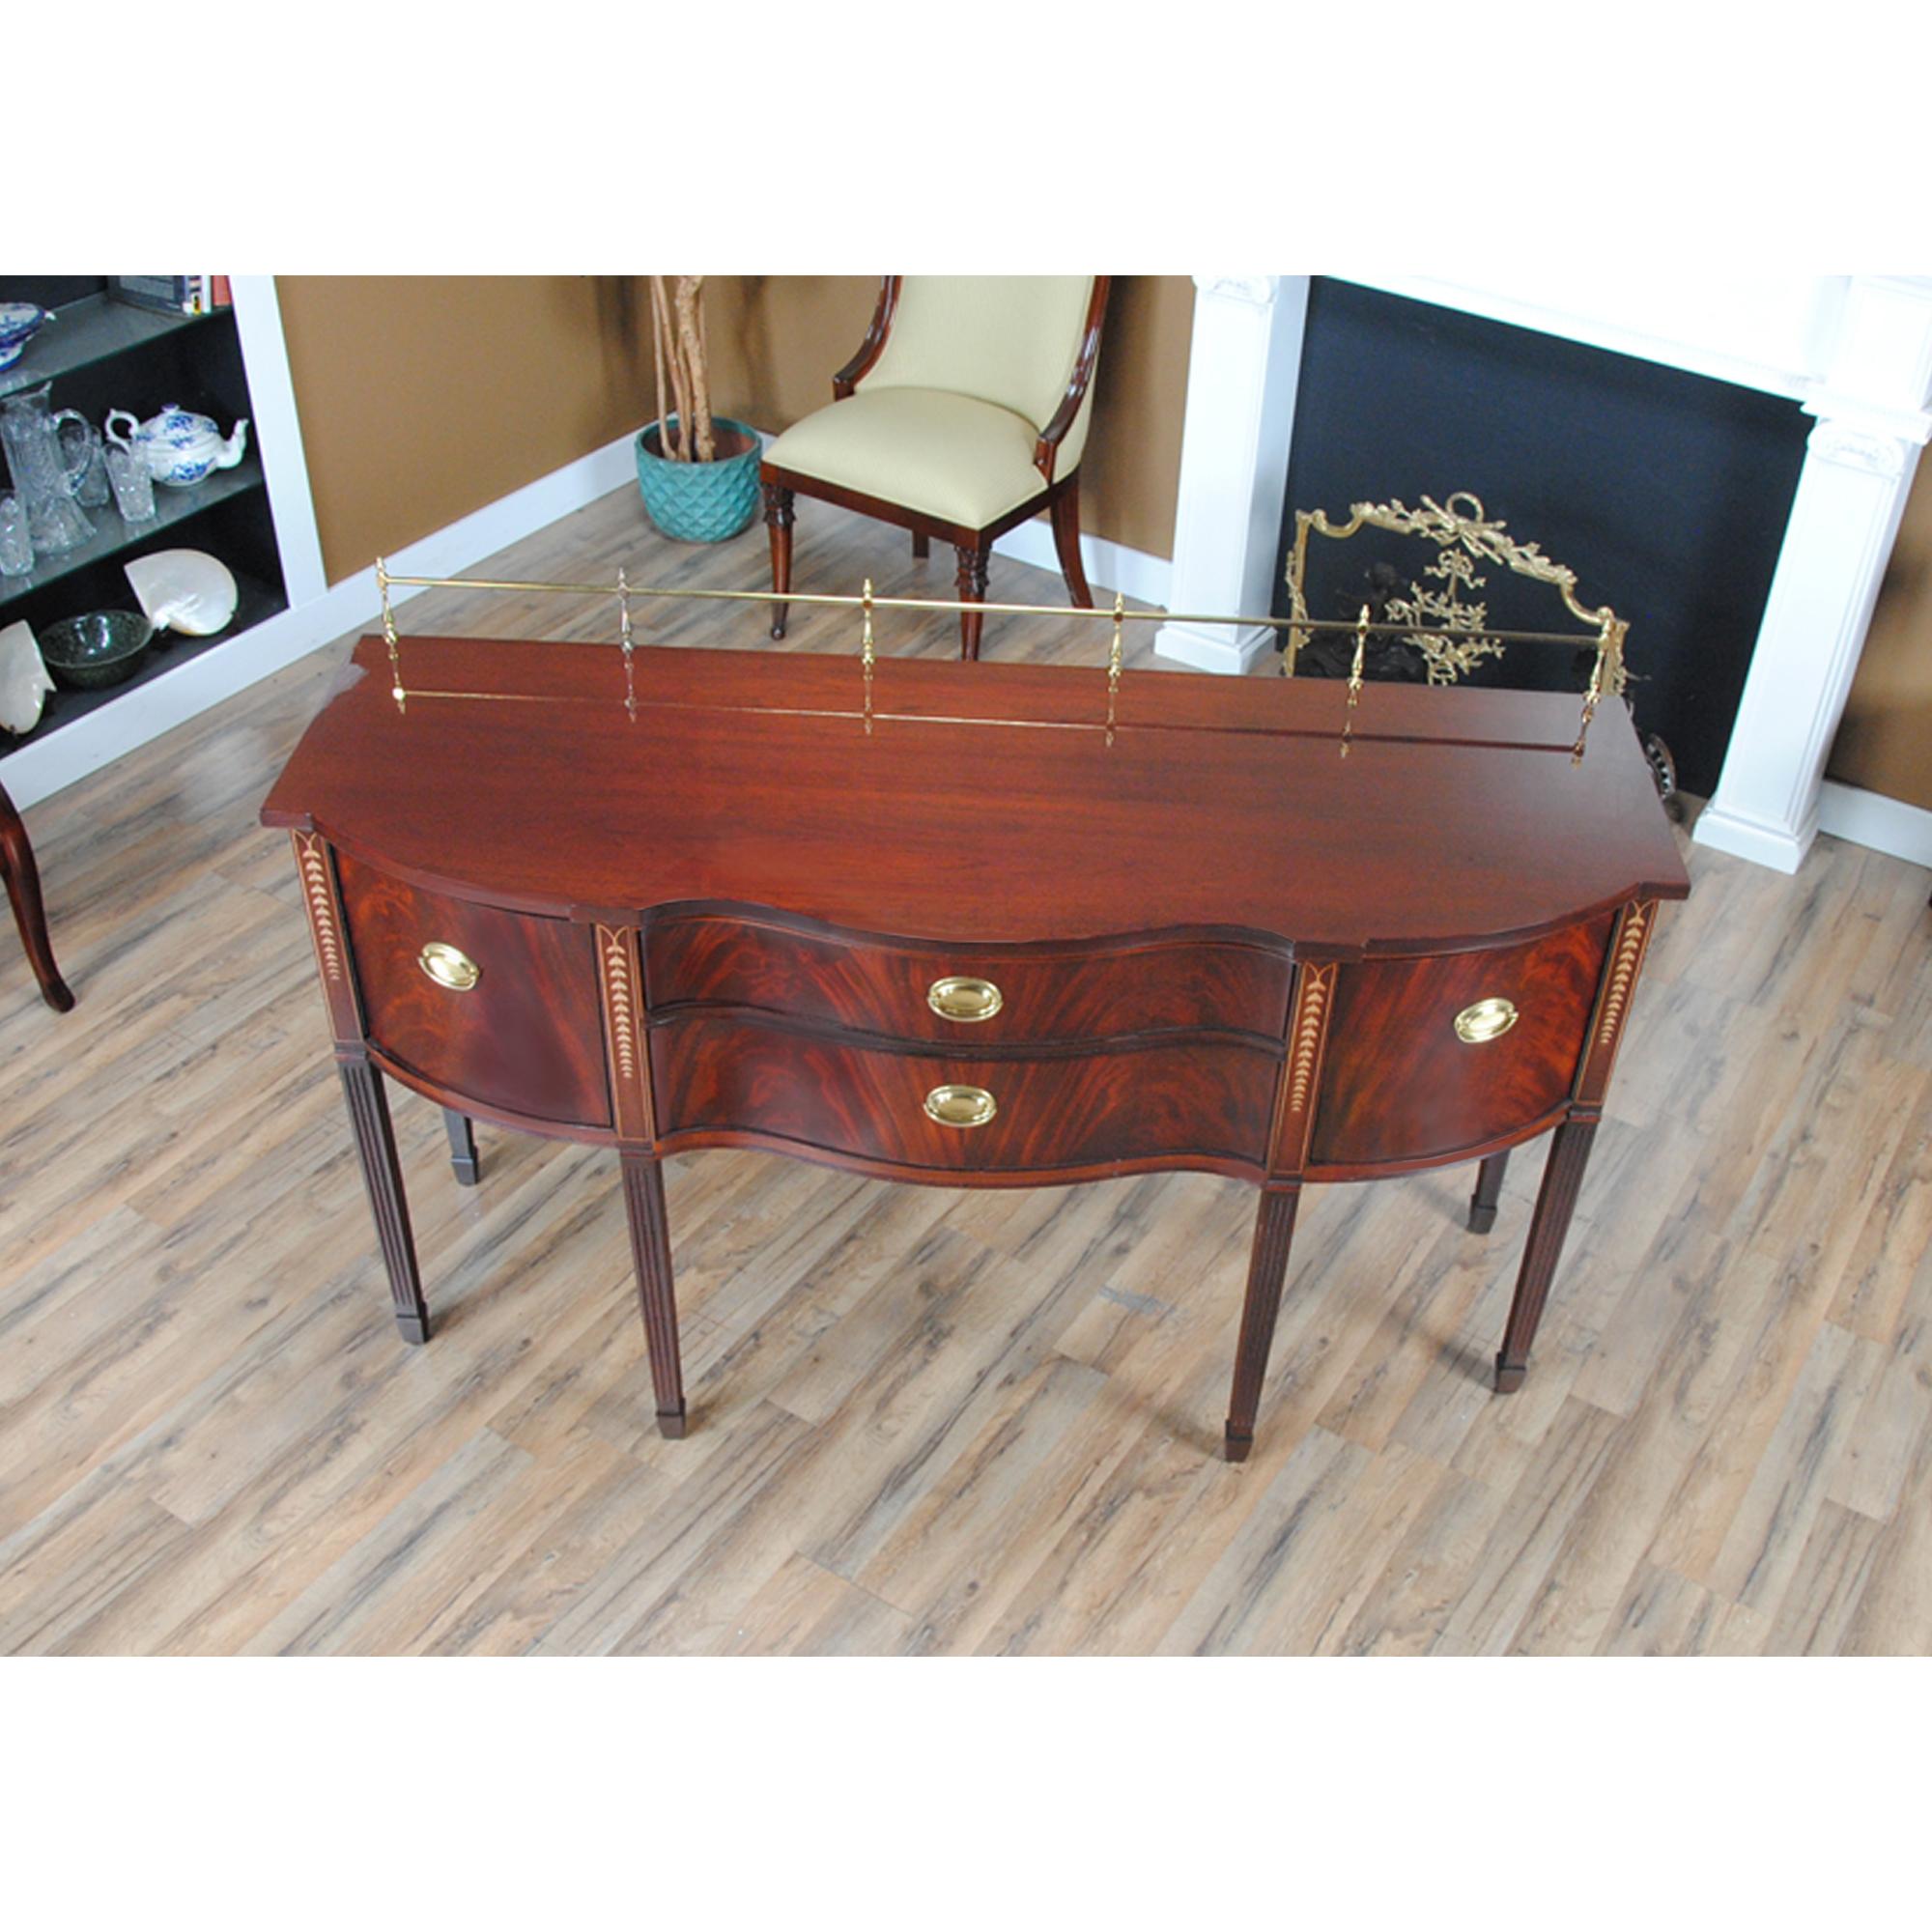 A vintage Vintage Inlaid Mahogany Sideboard in excellent condition with the top having recently been French polished to give it that “factory fresh” look and feel.

Simple yet sophisticated this beautiful Vintage Inlaid Mahogany Sideboard has a